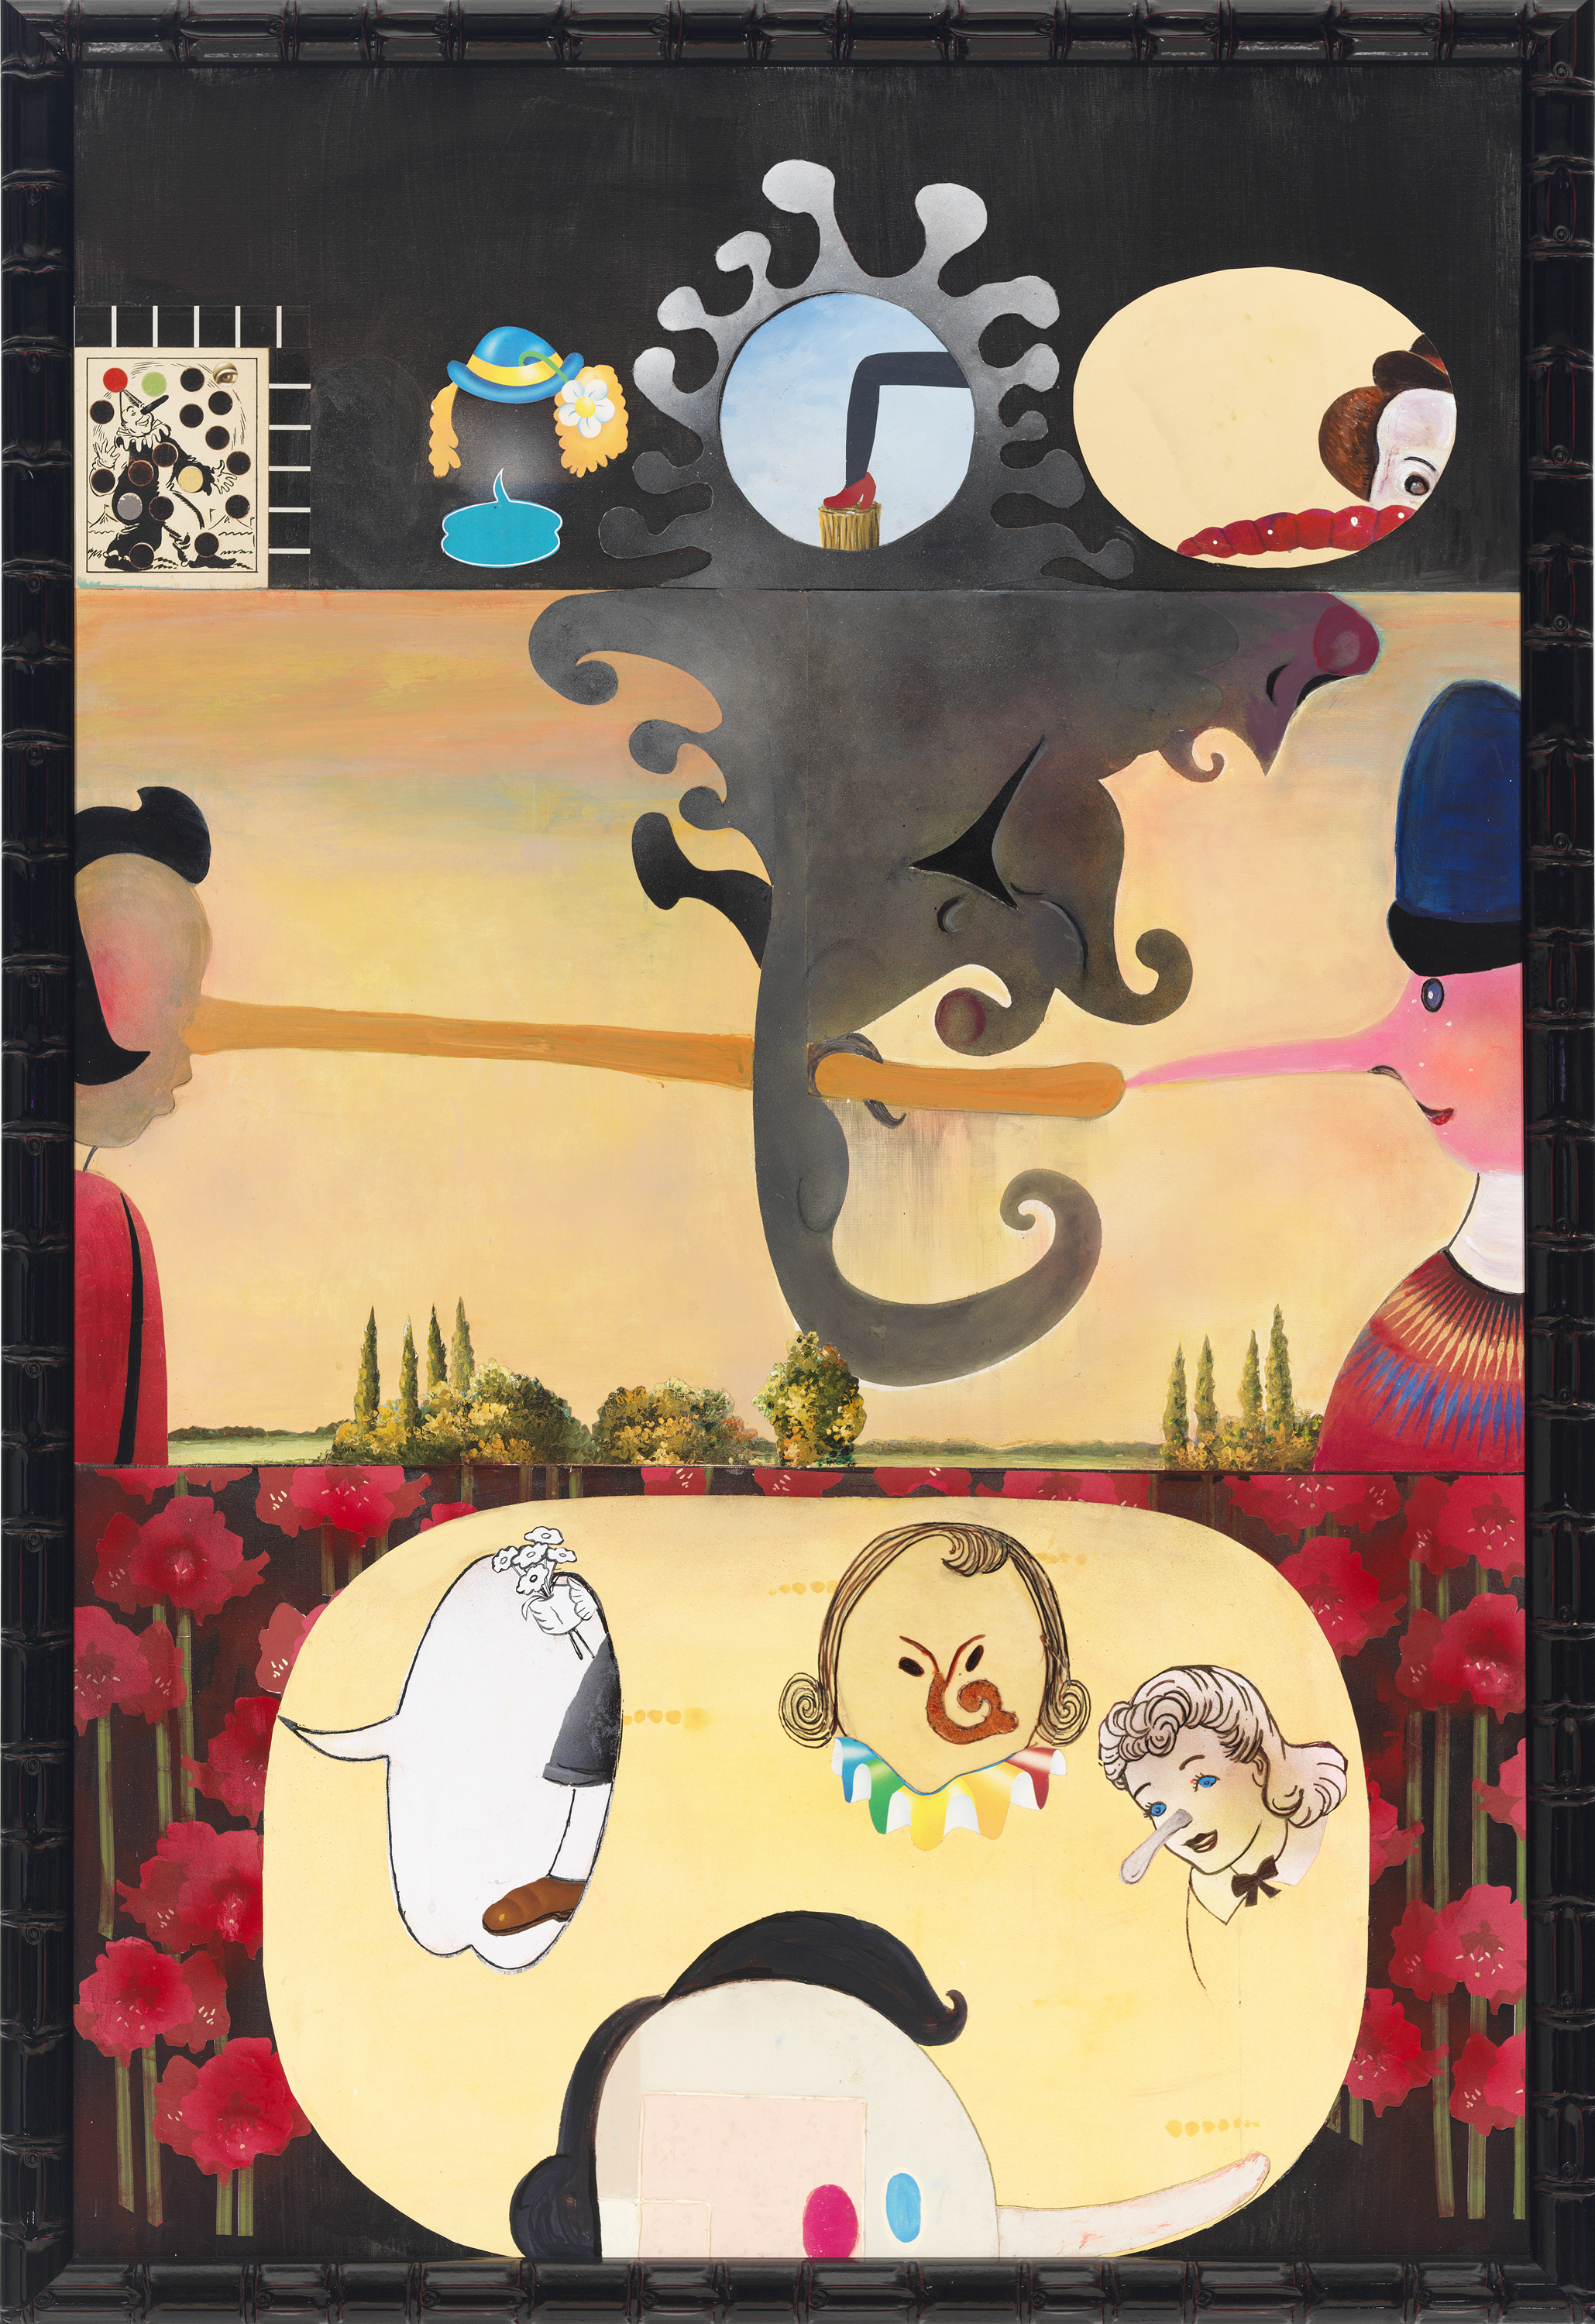 Pinocchio and Pinocchietta, 60" × 40", mixed media and collage on canvas, 2012